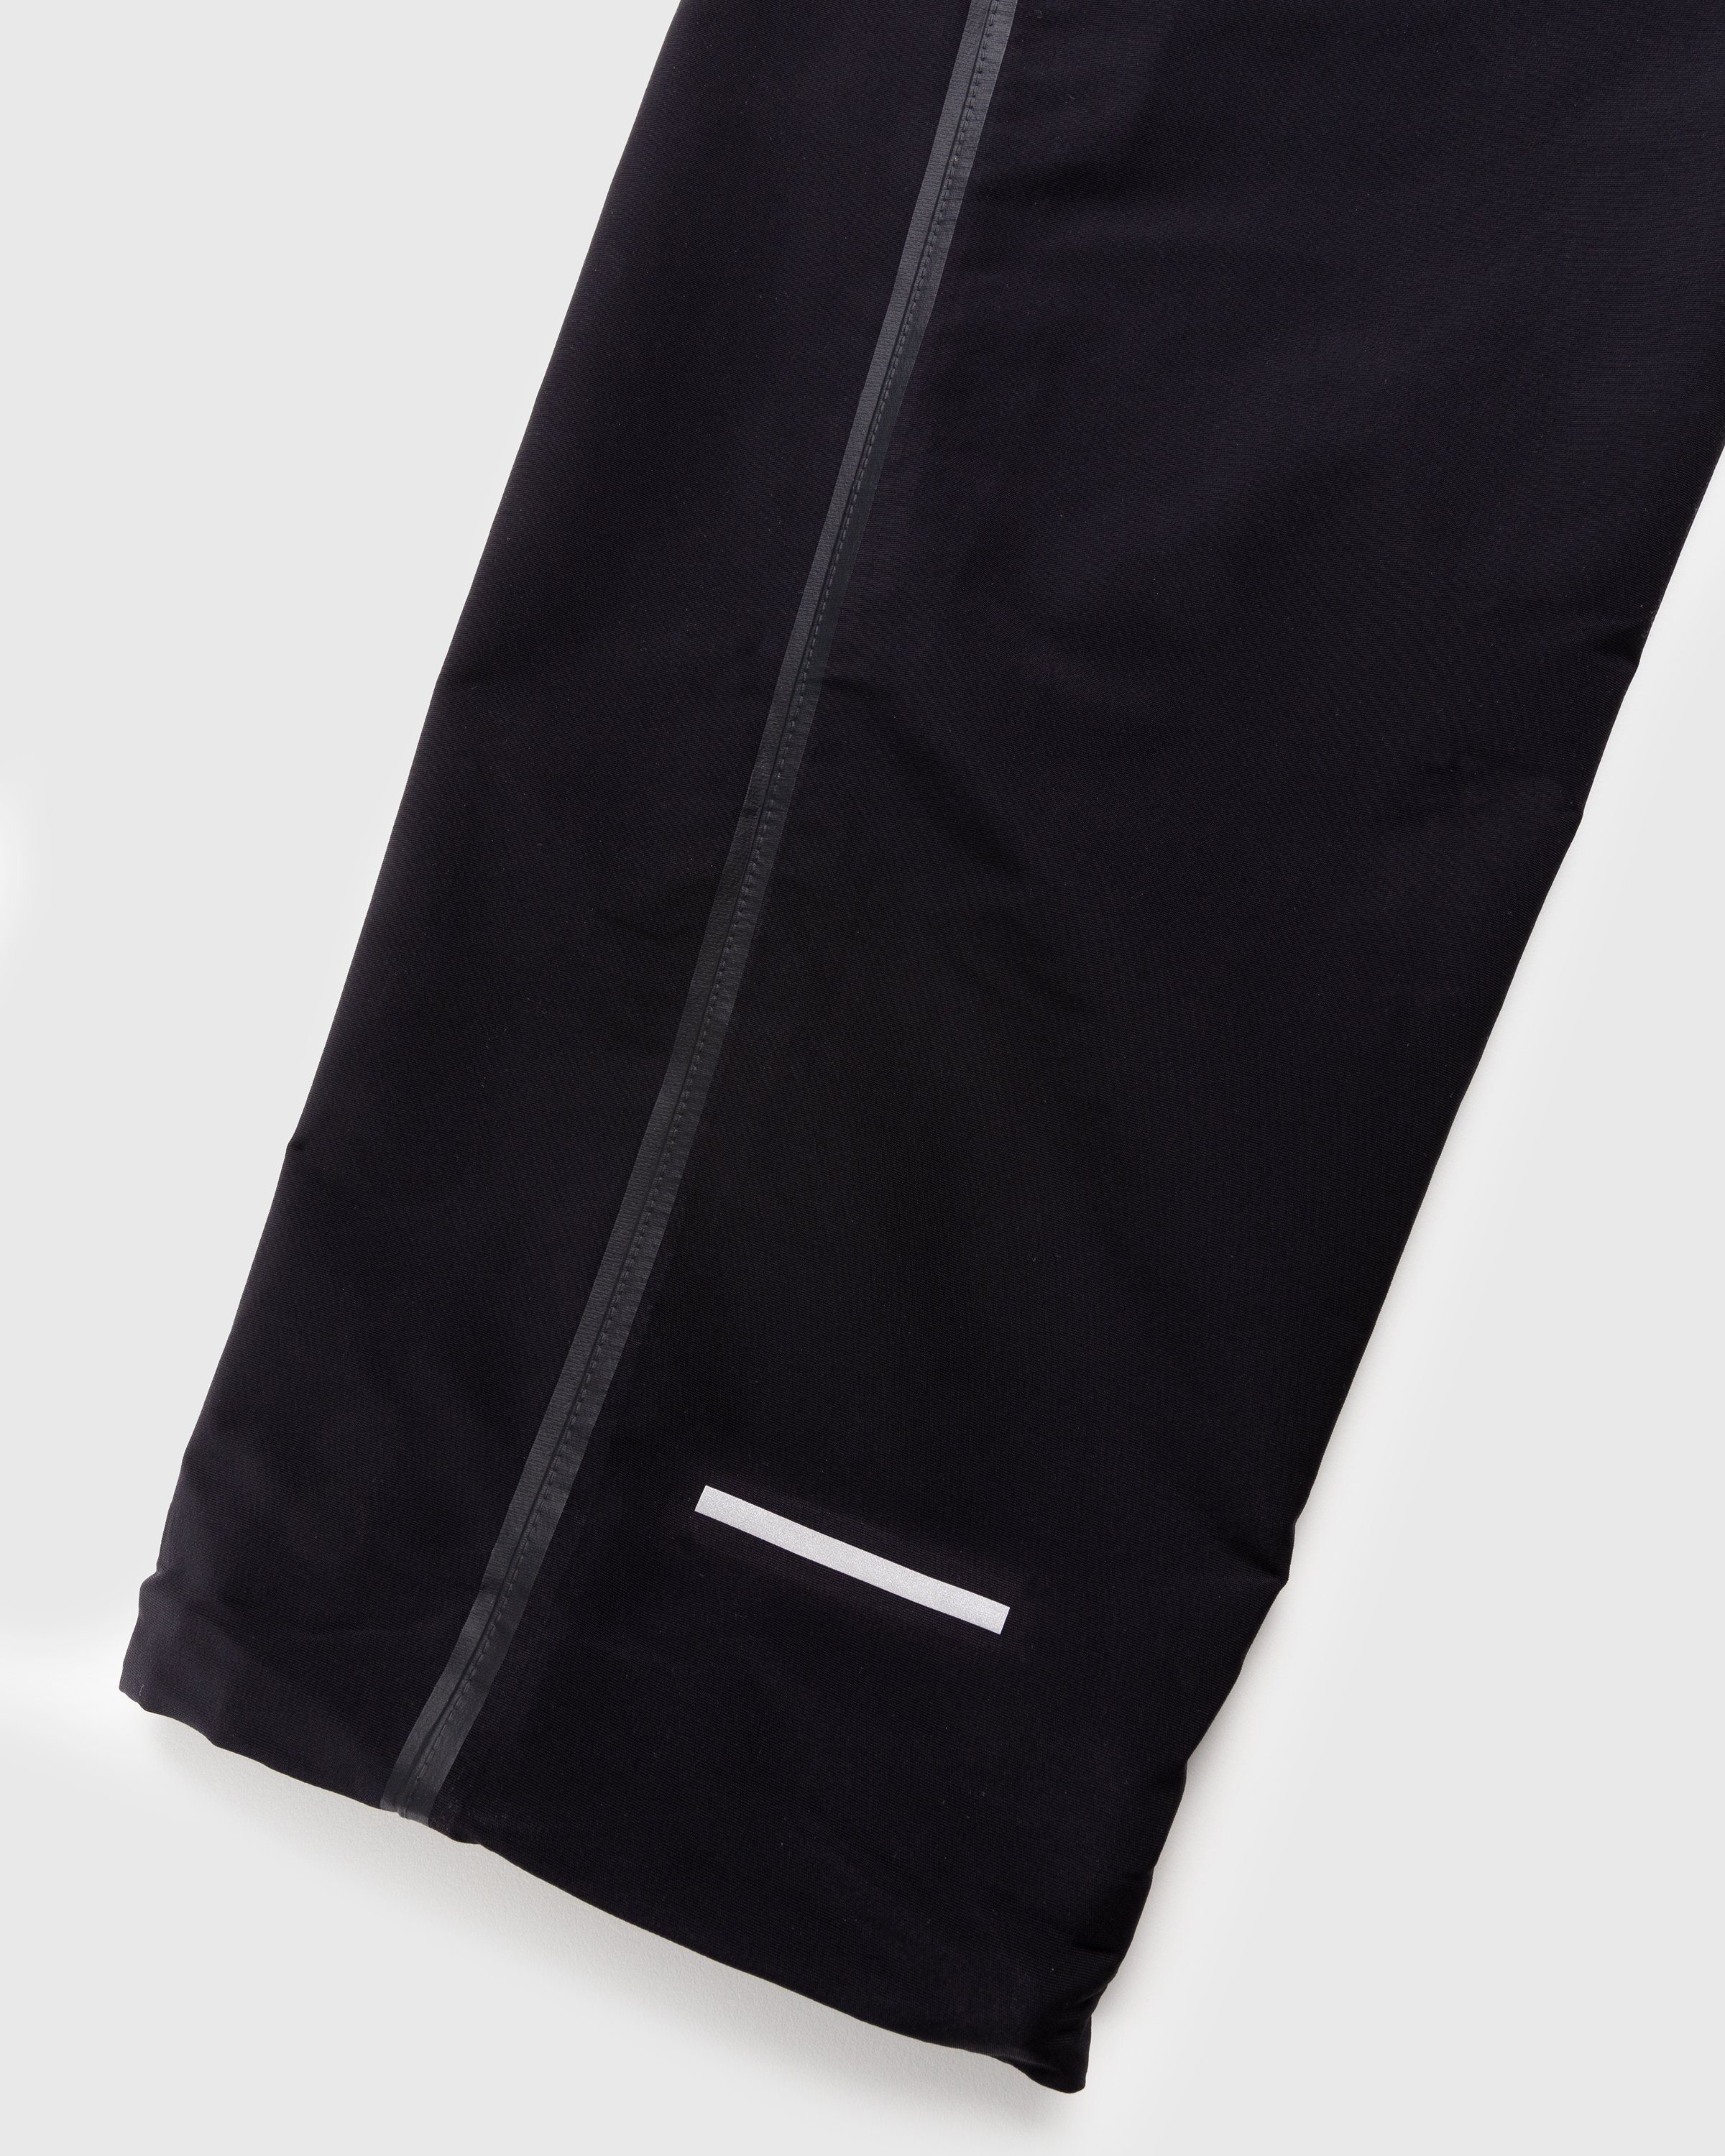 The North Face - RMST Mountain Pant Black - Clothing - Black - Image 3